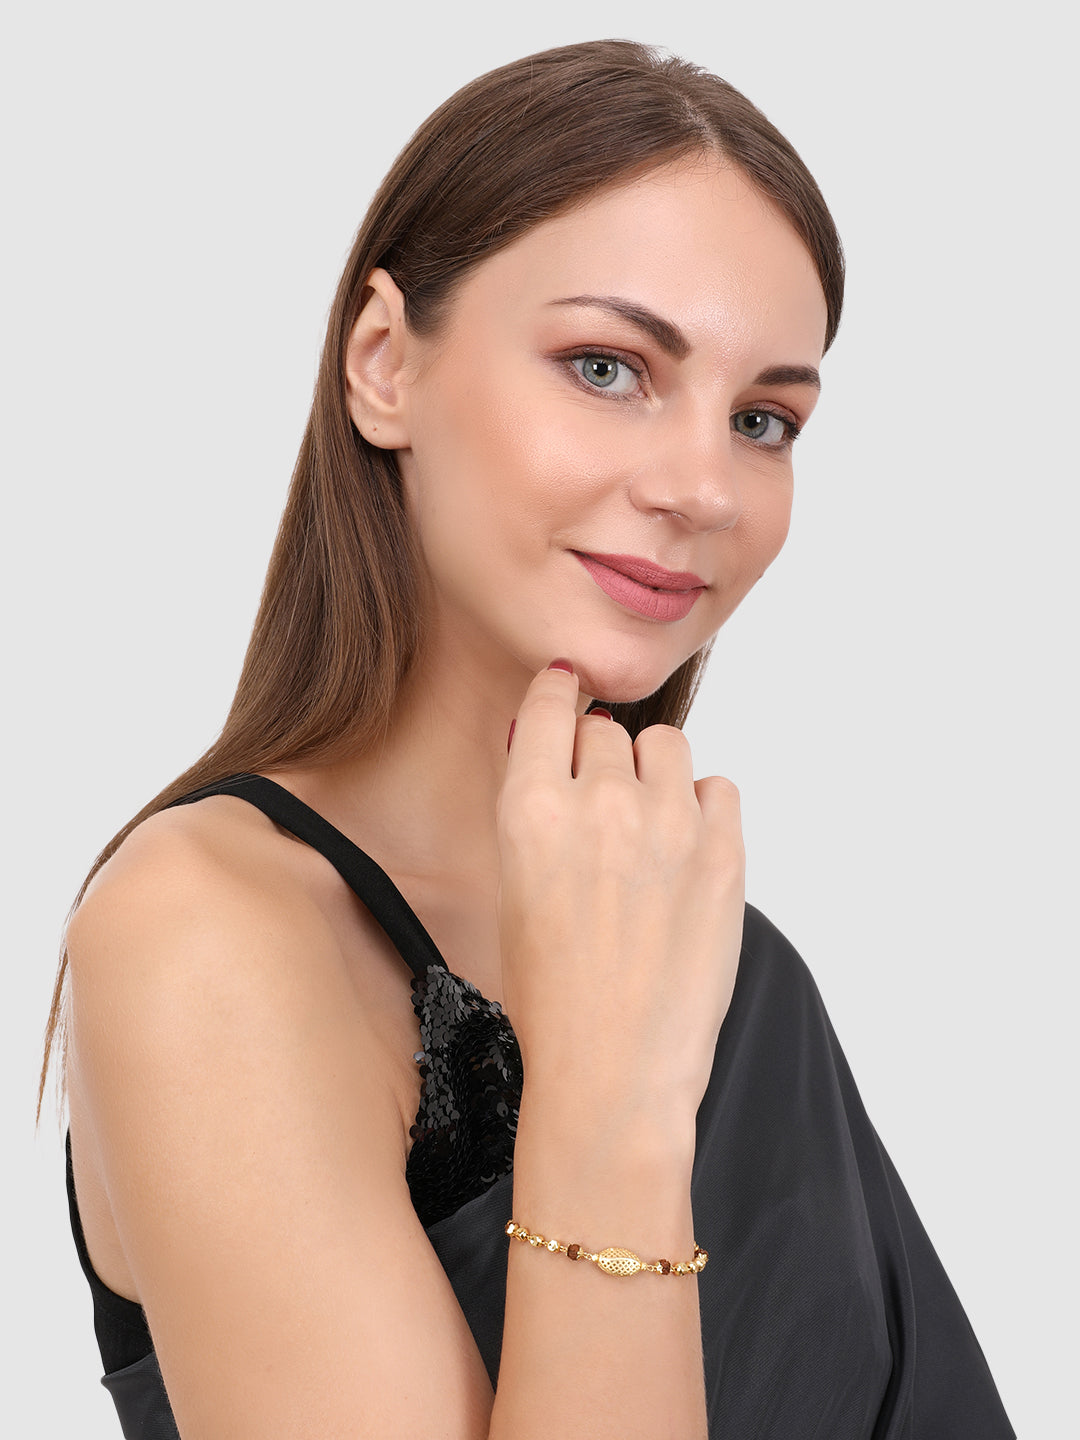 Women Gold-Toned & Brown Gold-Plated Charm Bracelet